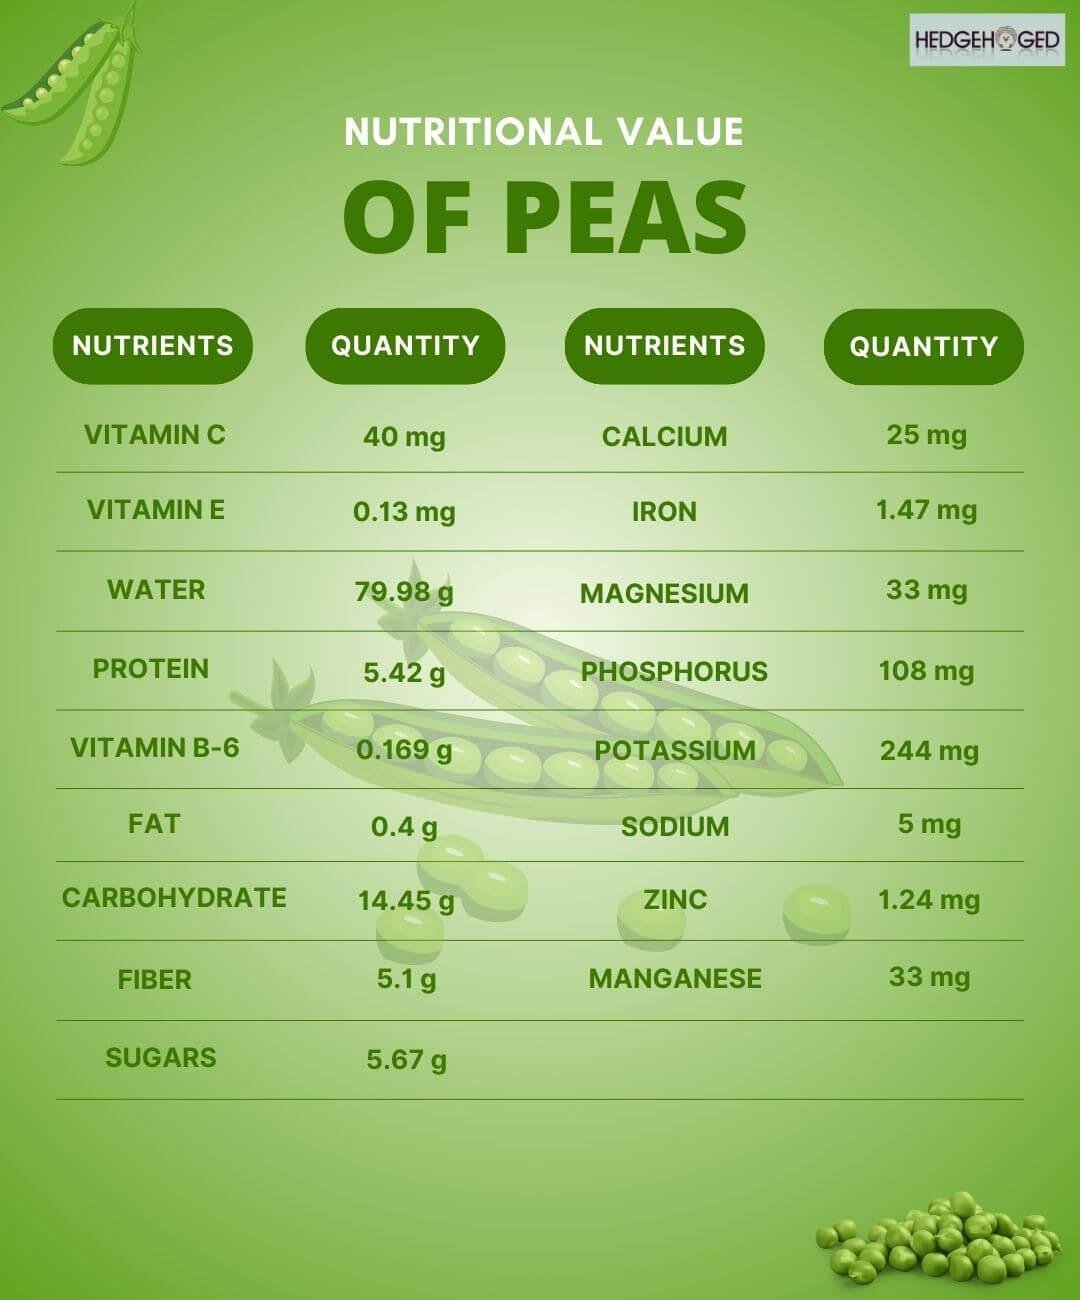 Nutritional Value Of Peas